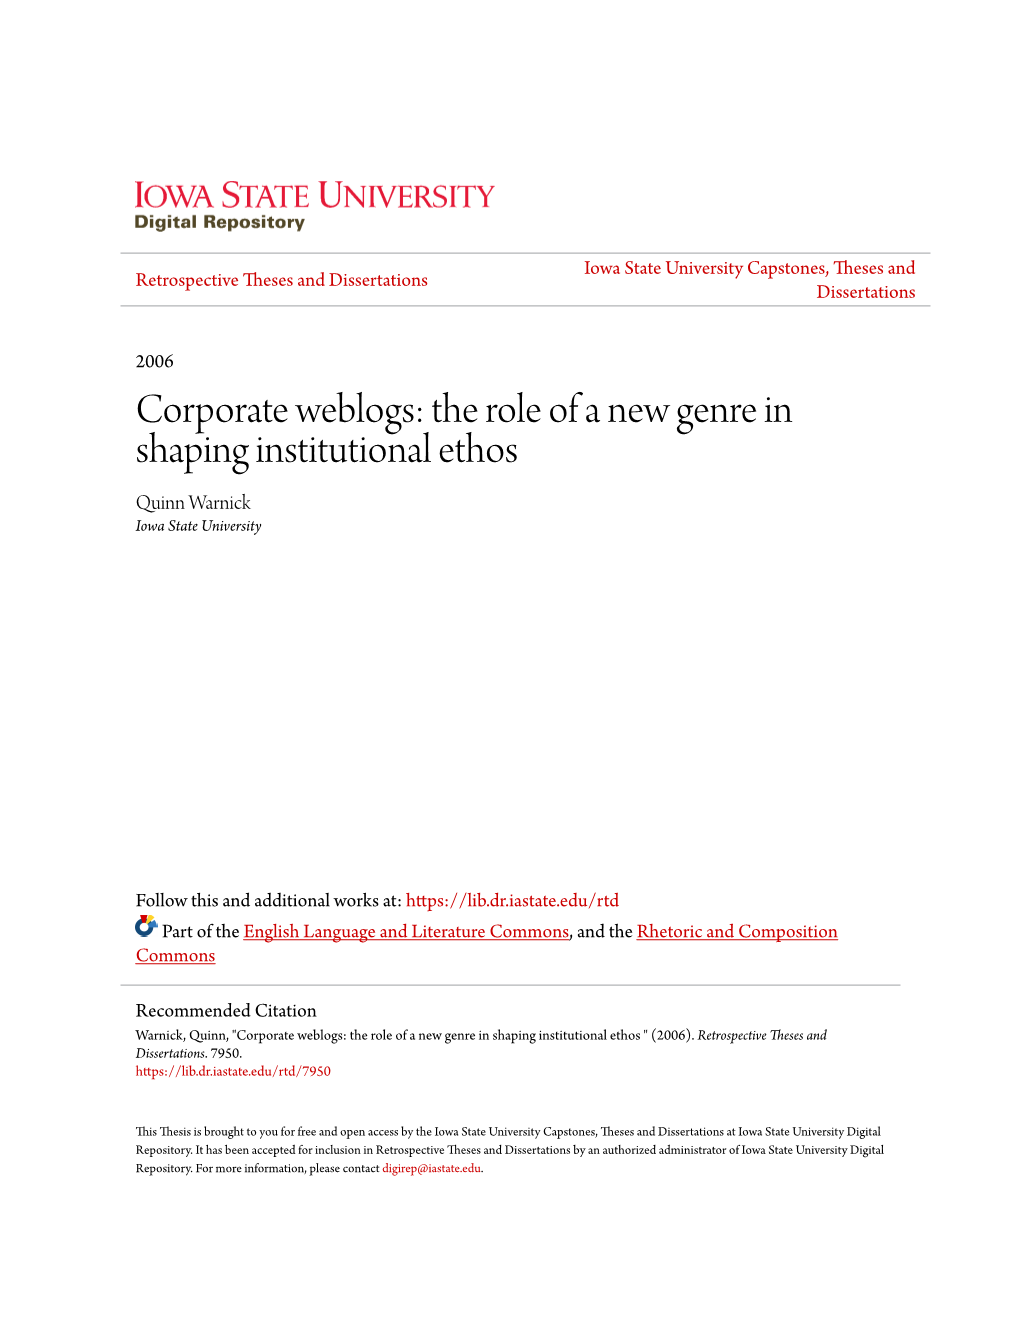 Corporate Weblogs: the Role of a New Genre in Shaping Institutional Ethos Quinn Warnick Iowa State University